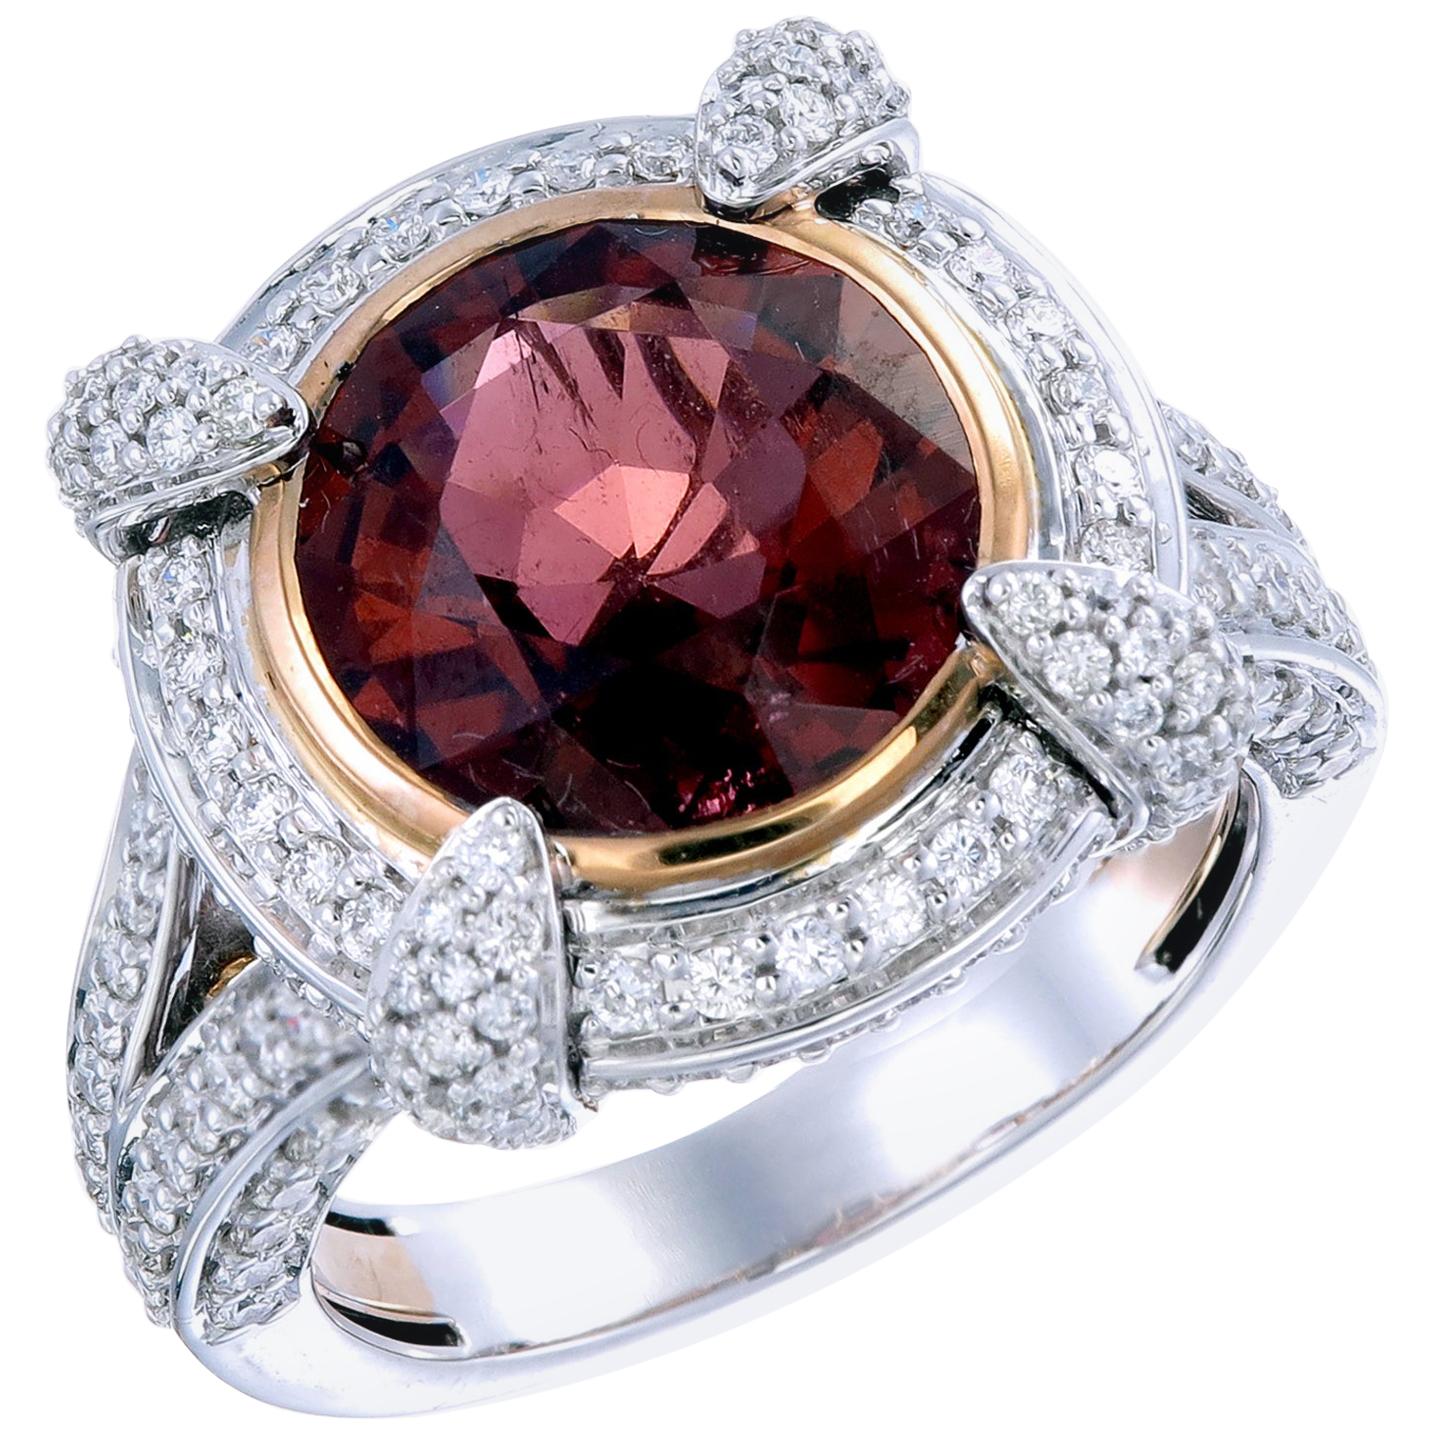 Zorab Creation 4.81 Carat Red Tourmaline and Diamond Sangria Ring For Sale